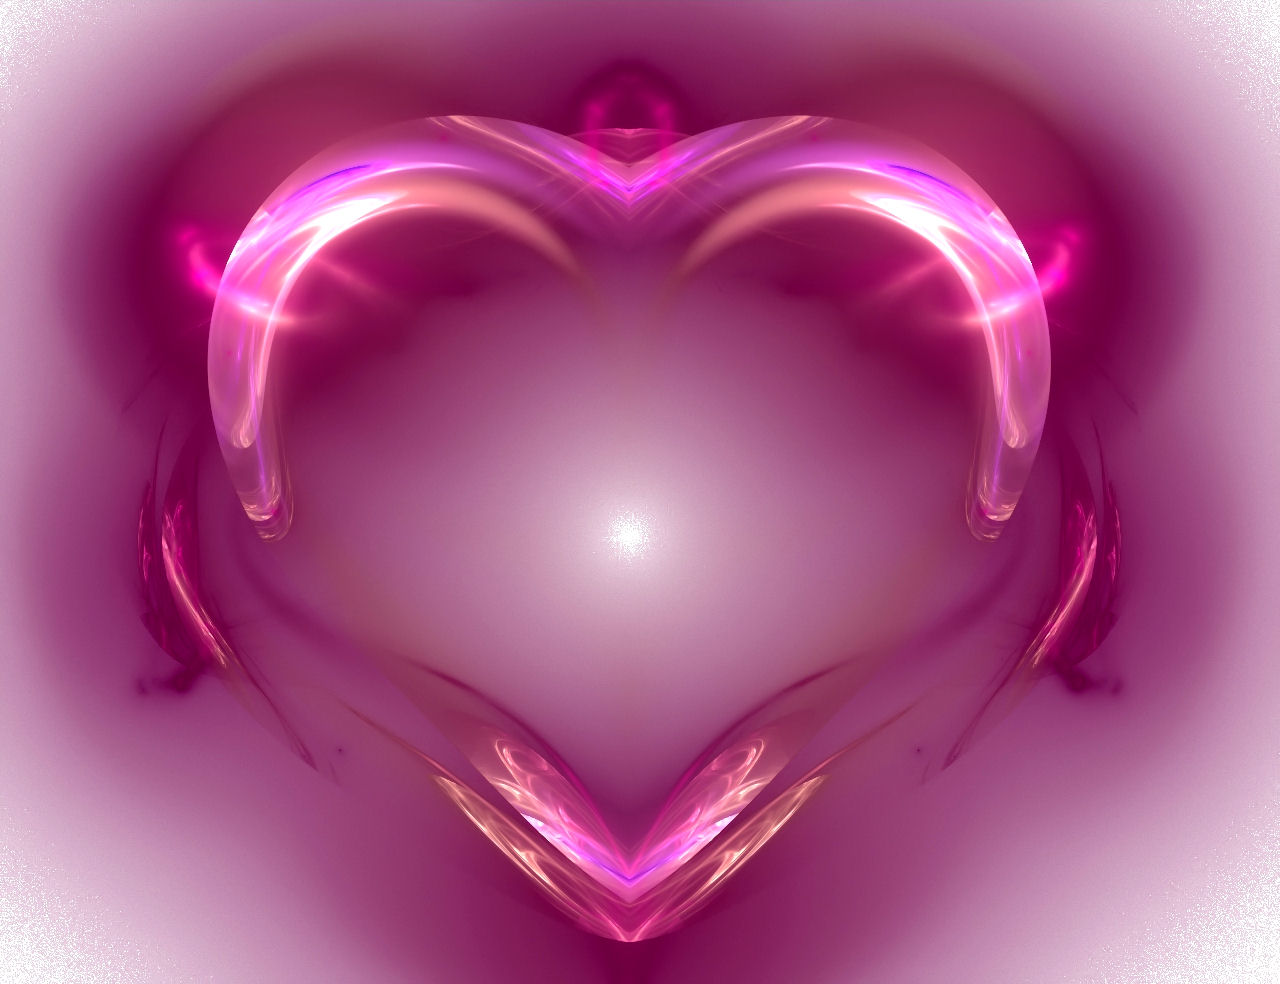 Heart Wallpaper Here You Can See Pink Abstract